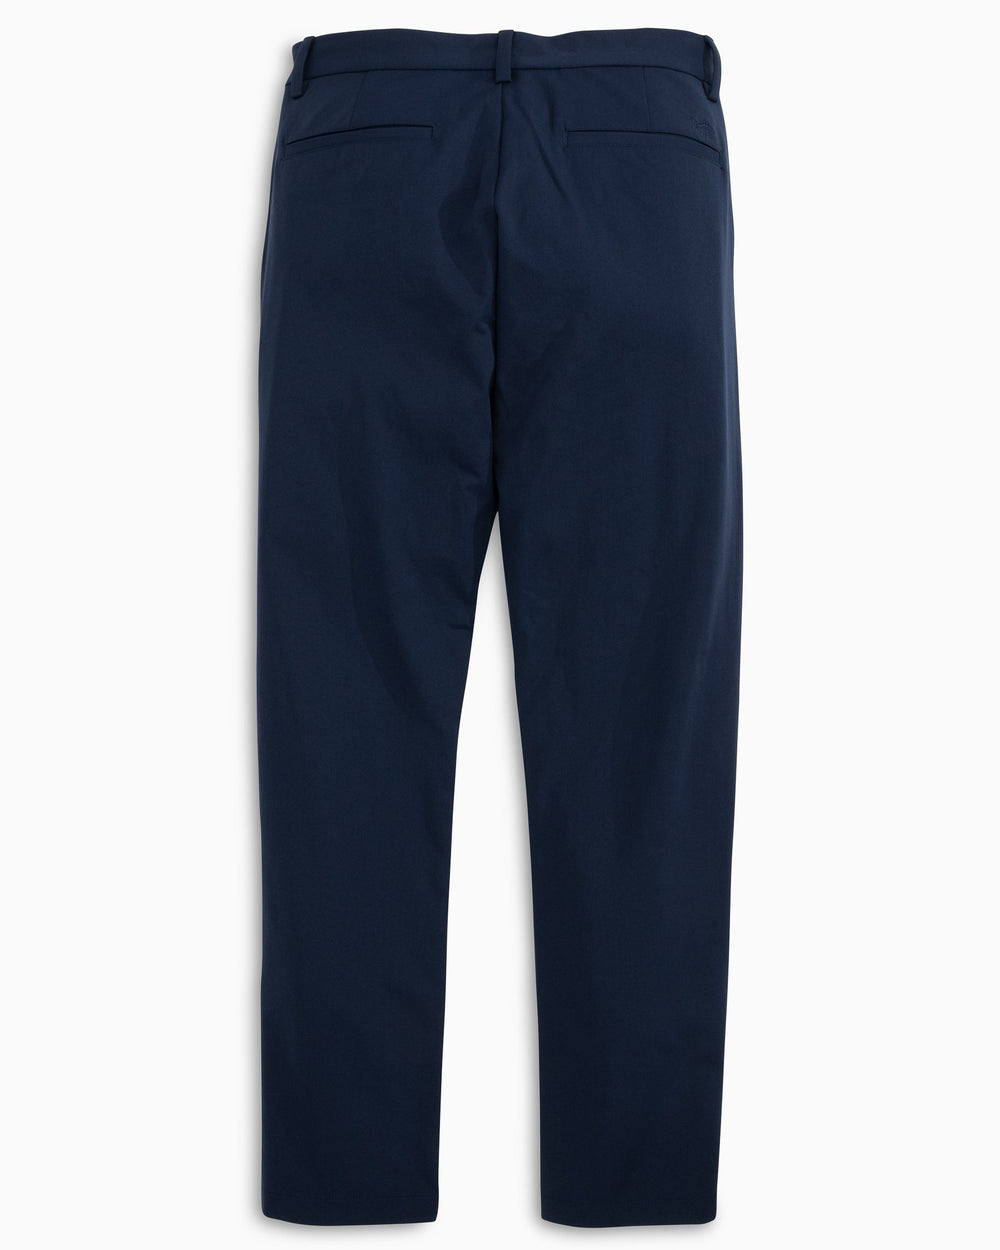 The flat back view of the Men's Jack Performance Pant by Southern Tide - True Navy